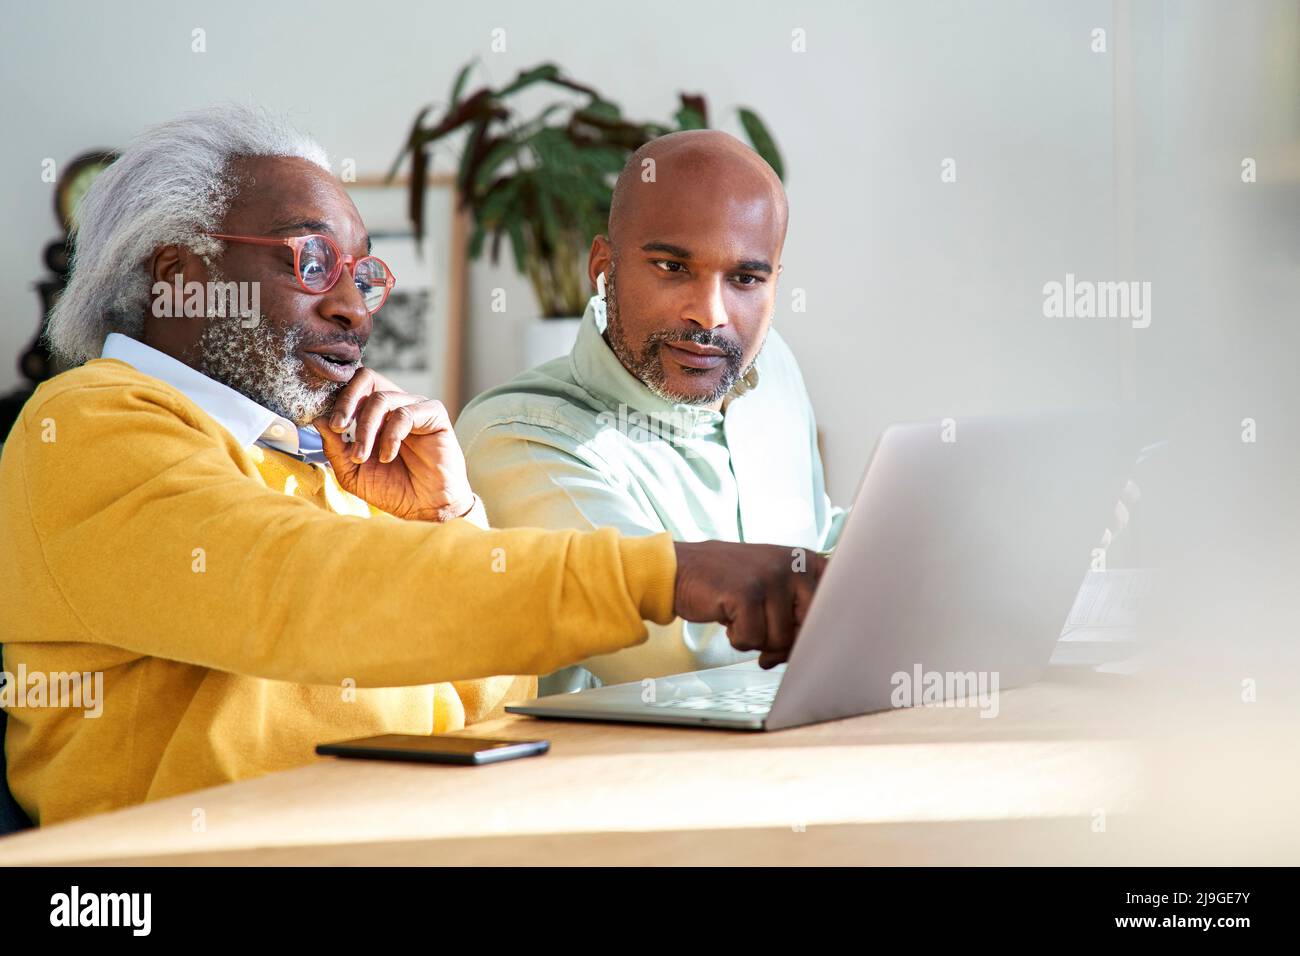 Father and son using laptop Stock Photo